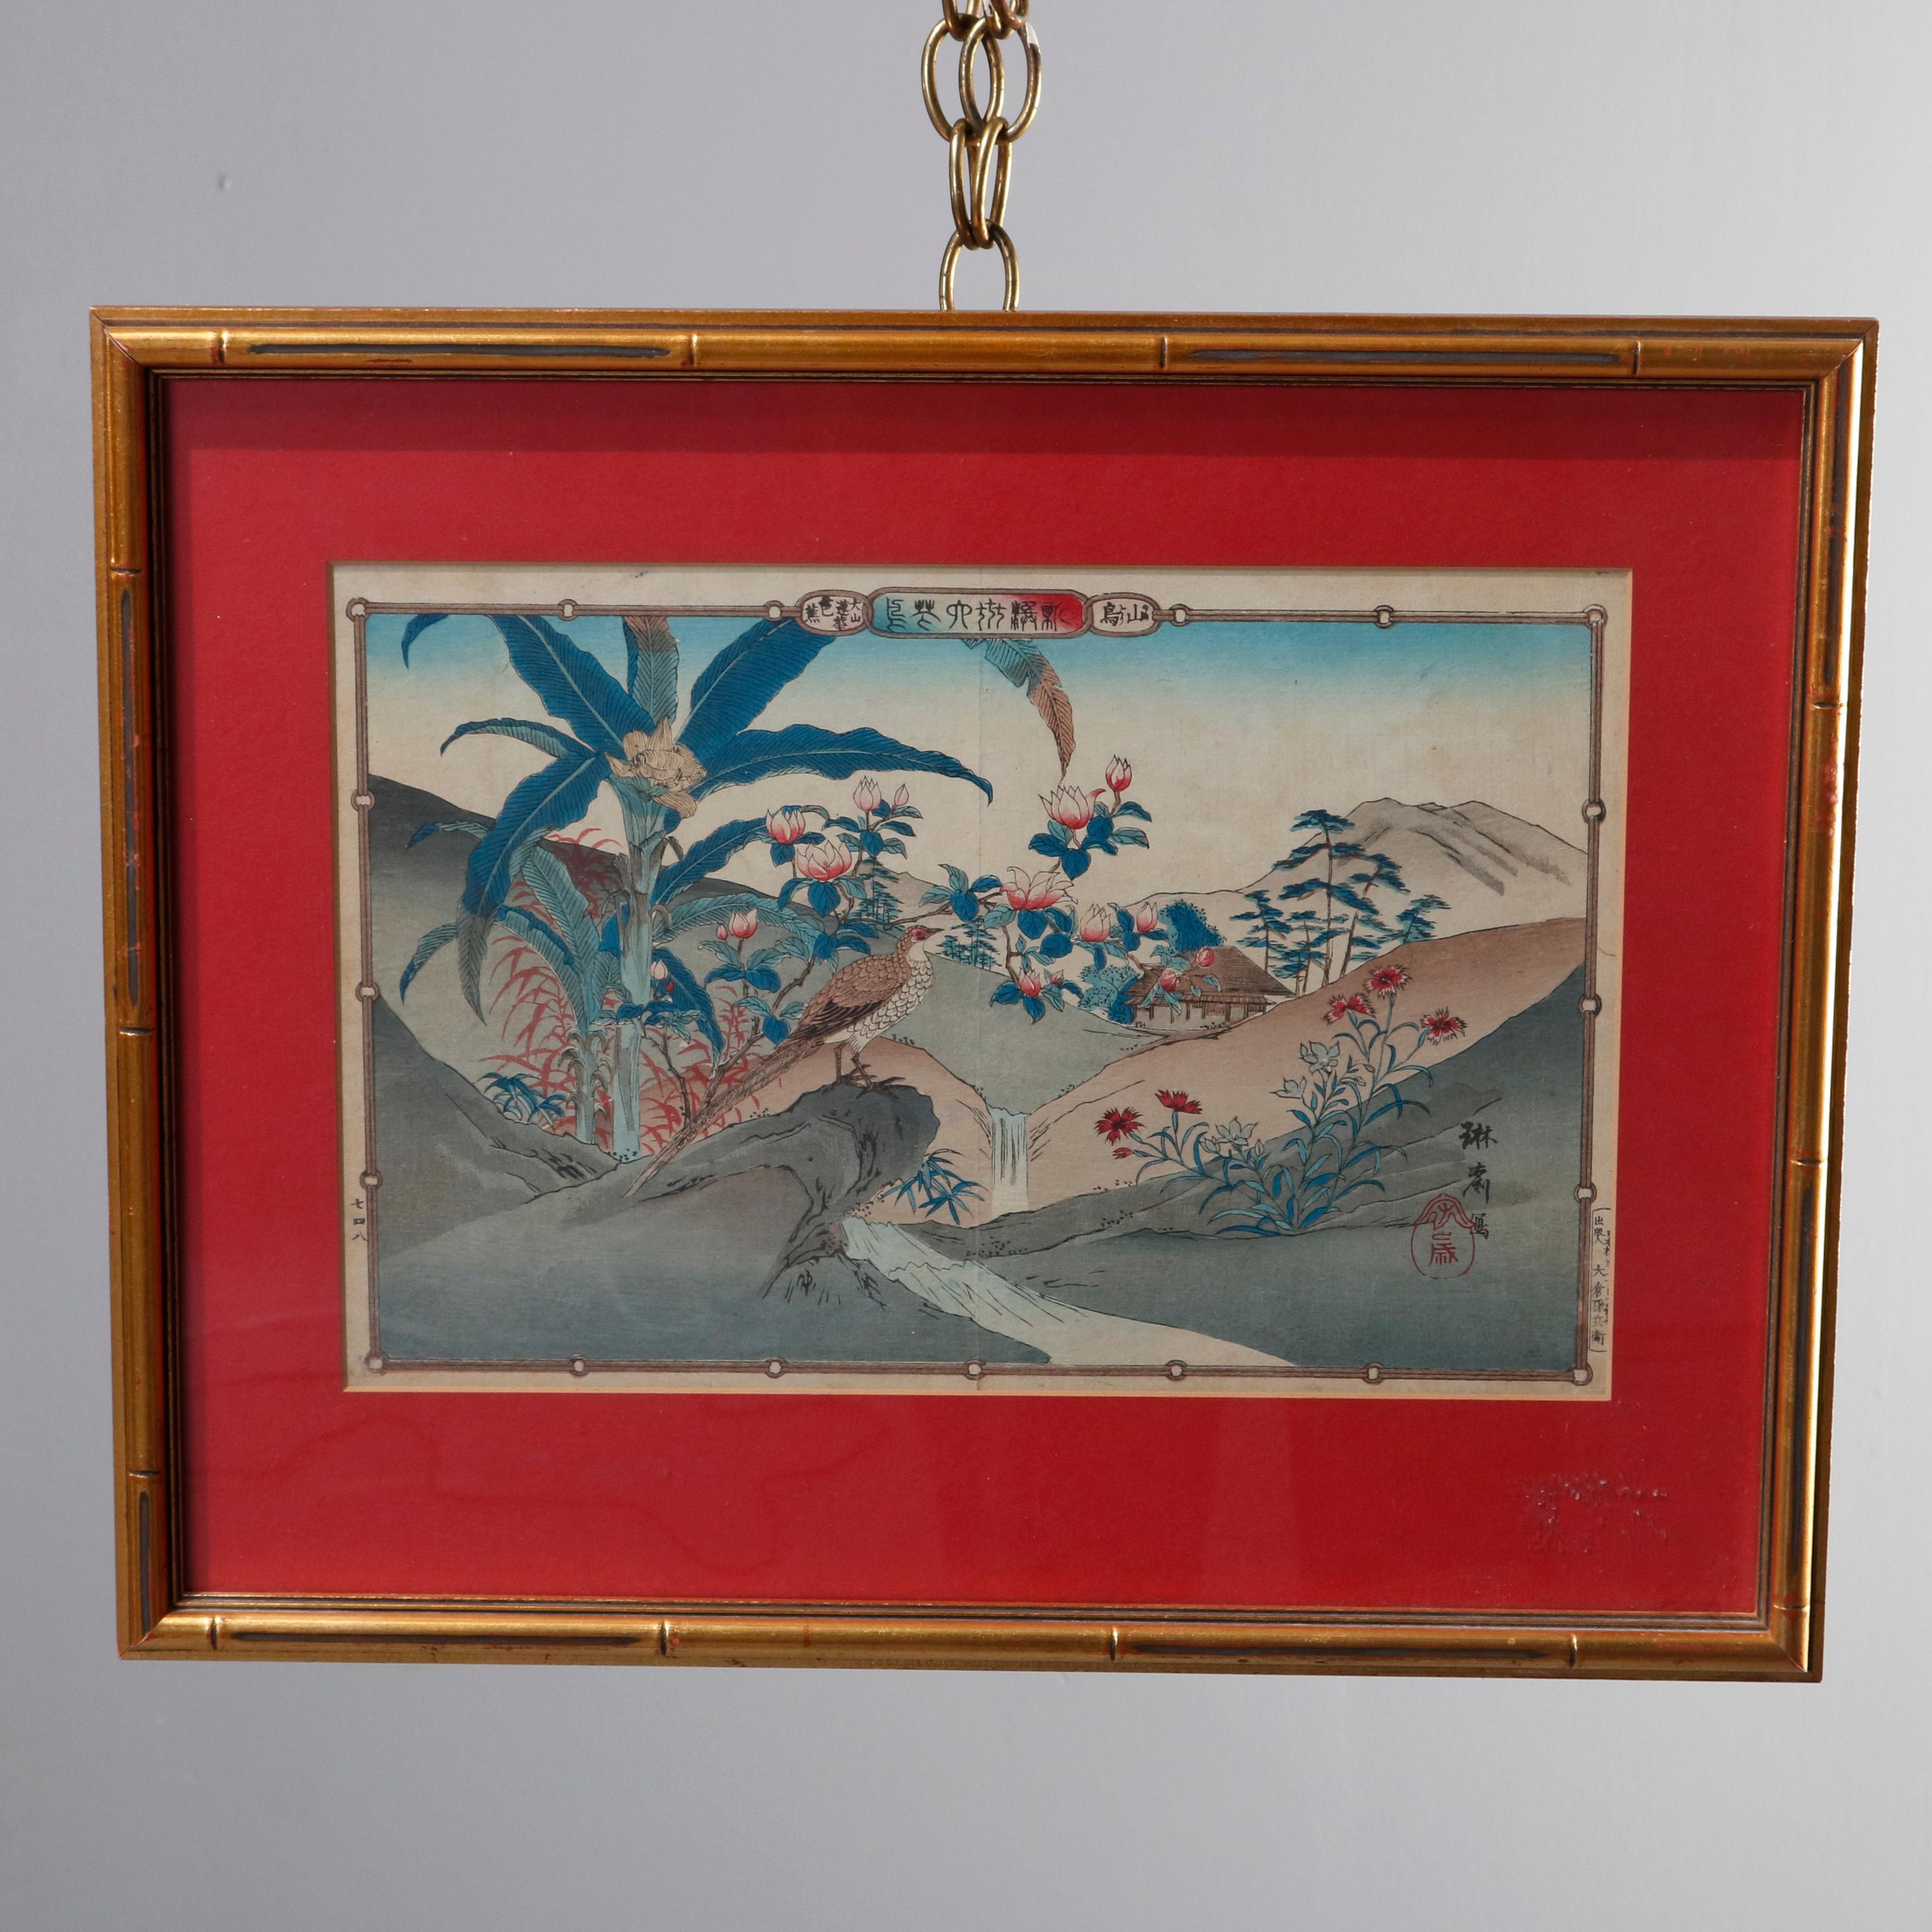 A set of four antique Japanese Hiroshige School woodblock prints depict countryside settings with bodies of water, structures, and birds, chop mark signed and verbiage as photographed, circa 1900

Measures: 15.25